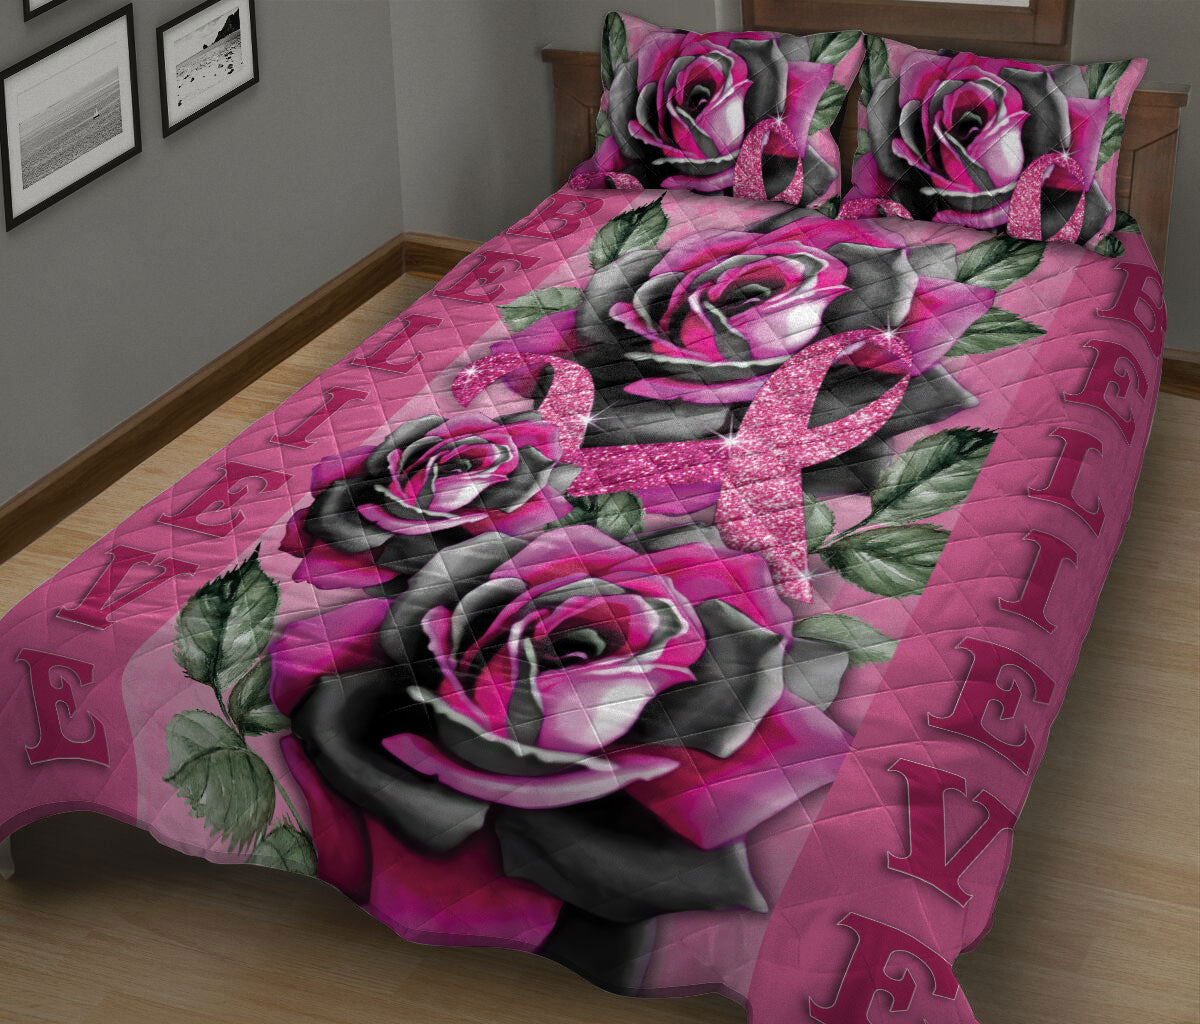 Ohaprints-Quilt-Bed-Set-Pillowcase-Breast-Cancer-Awareness-Pink-Rose-Floral-Pattern-Get-Well-Soon-Gift-Blanket-Bedspread-Bedding-2543-King (90'' x 100'')